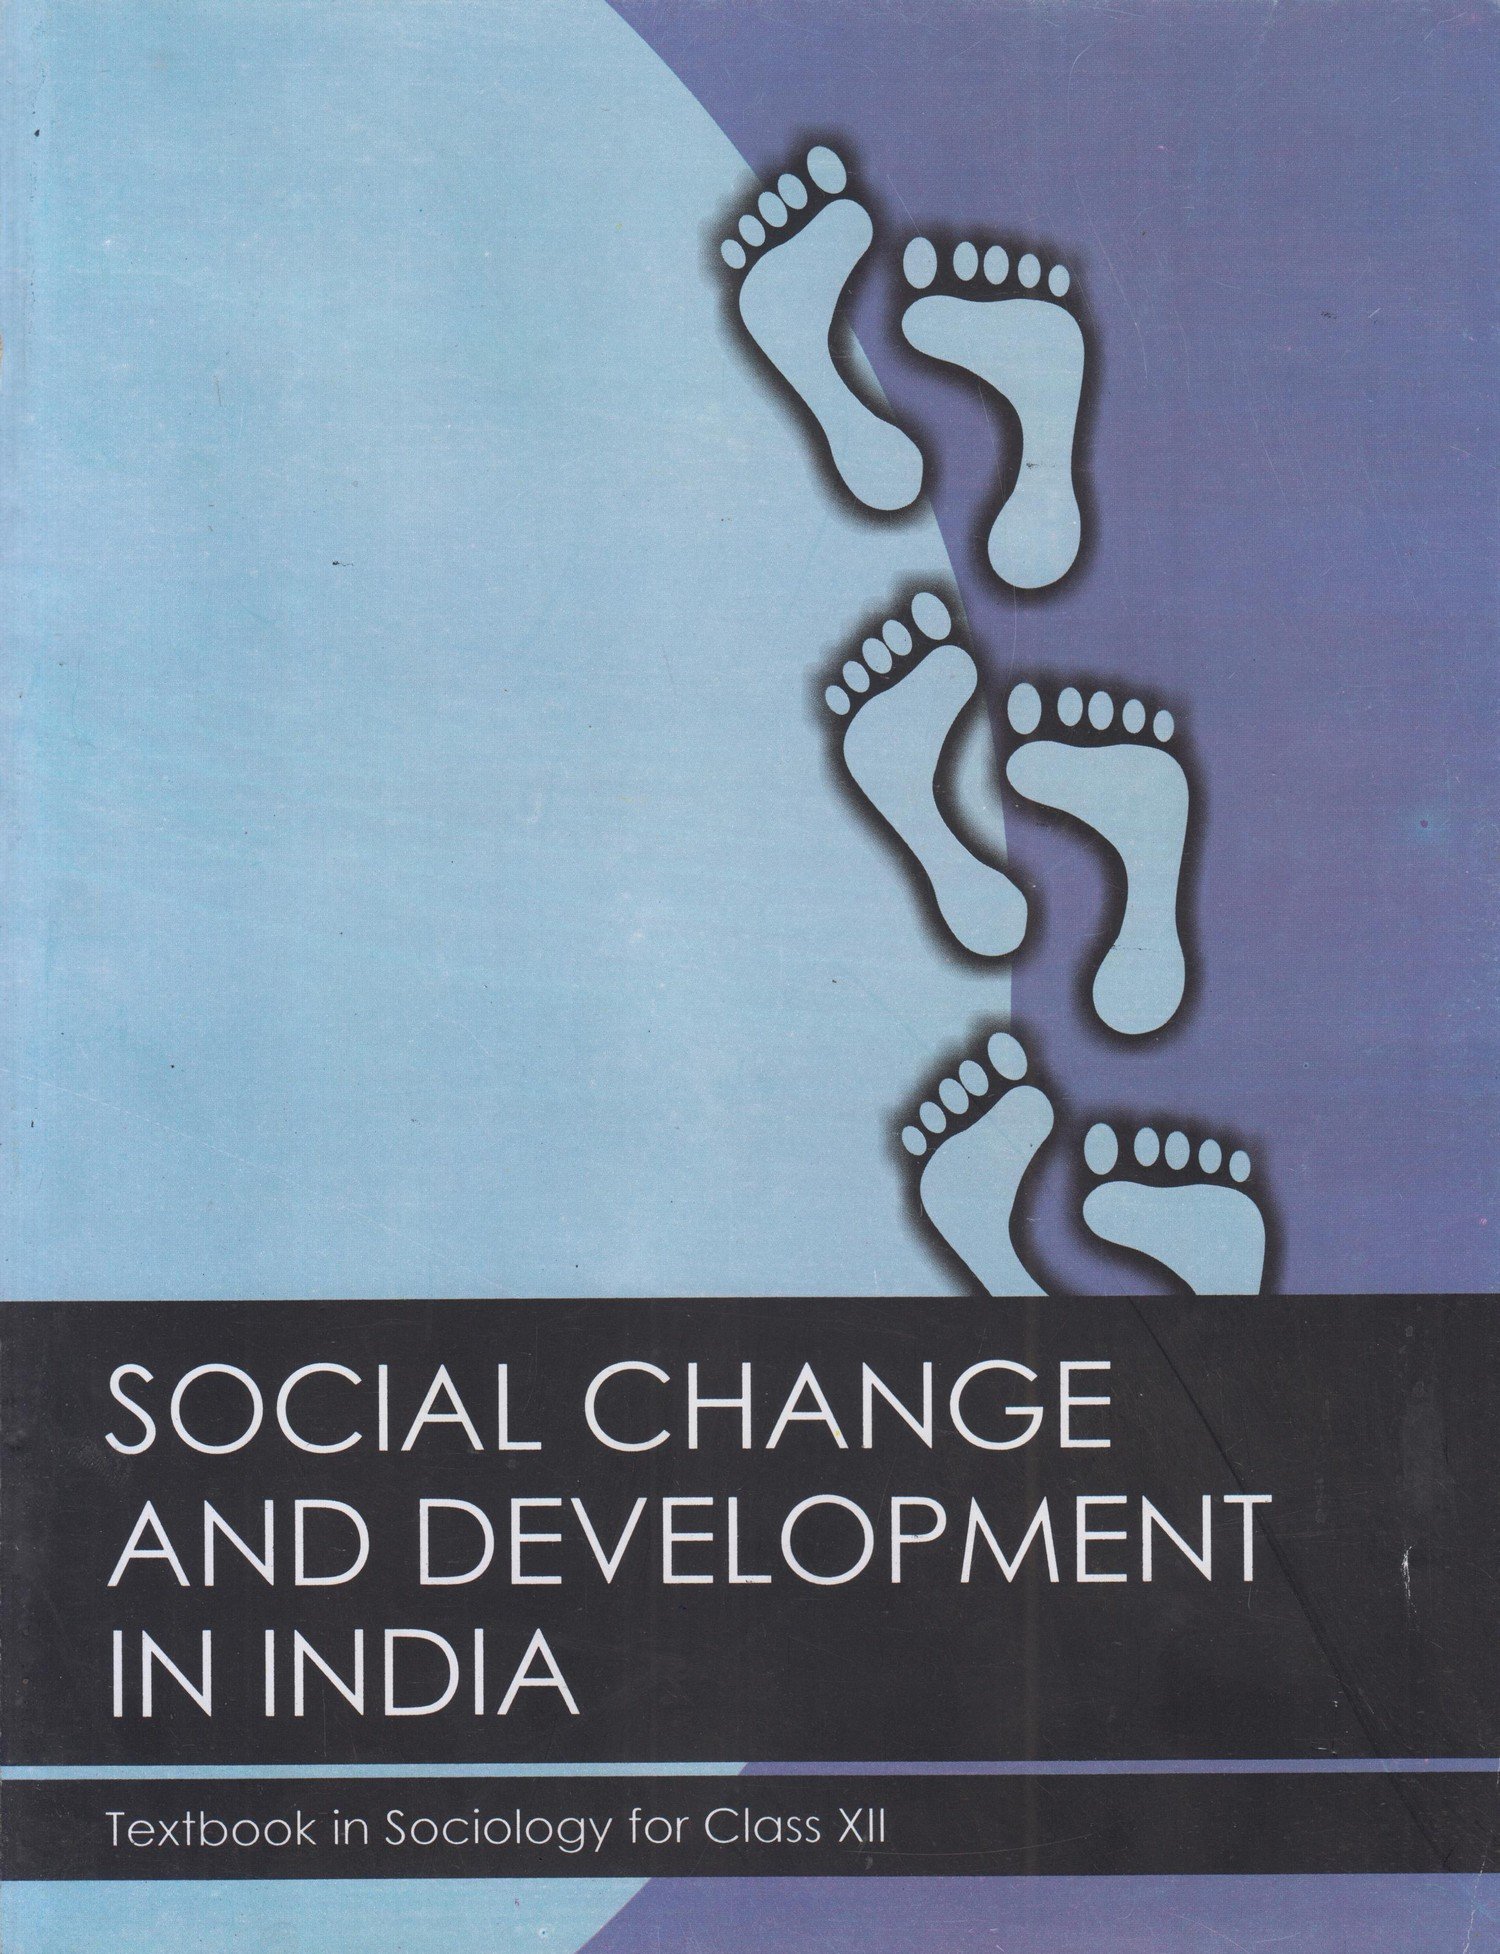 Sociology for Class 12